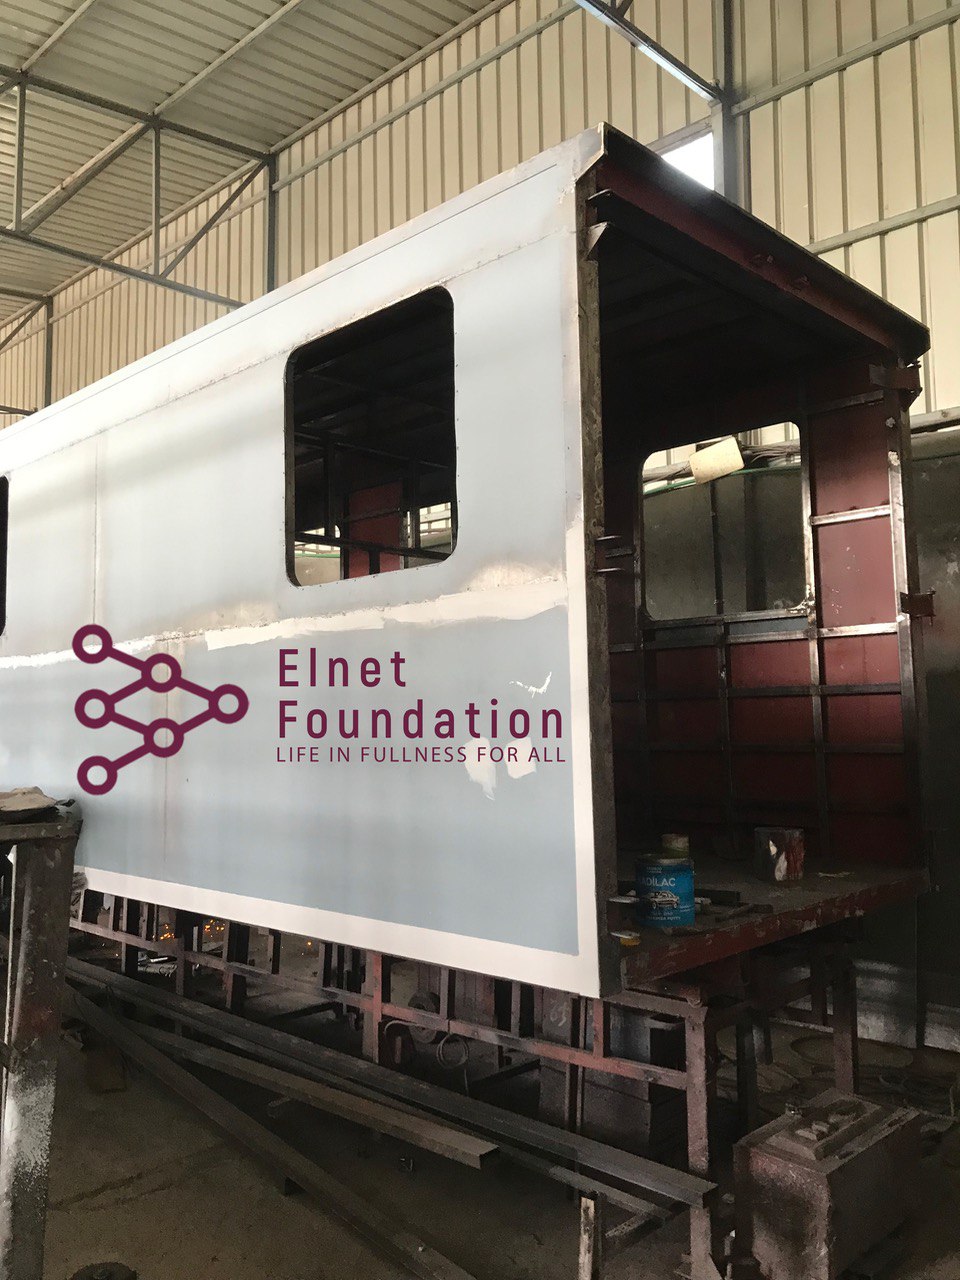 Today Elnet Foundation and Brooke Ethiopia teams joined up to visit the development of the equine mobile veterinary clinic at Anta Engineering Solution.